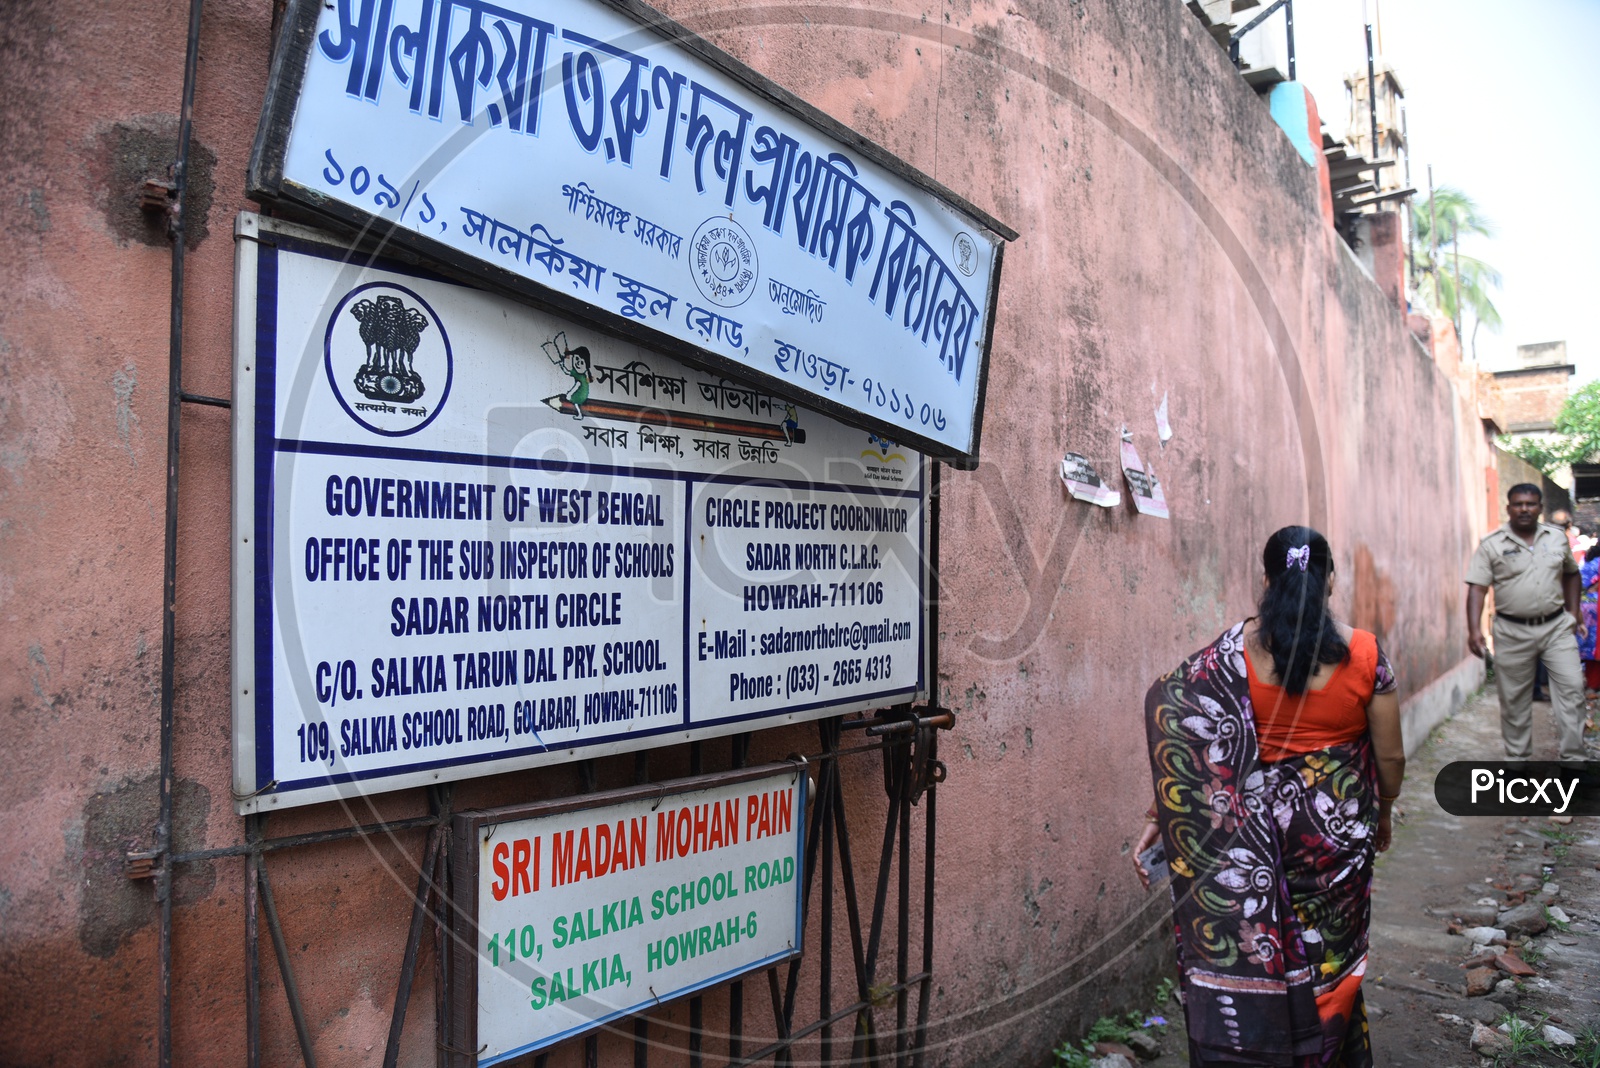 Government Of West Bengal Office Of The Sub Inspector Of Schools,  Name Board